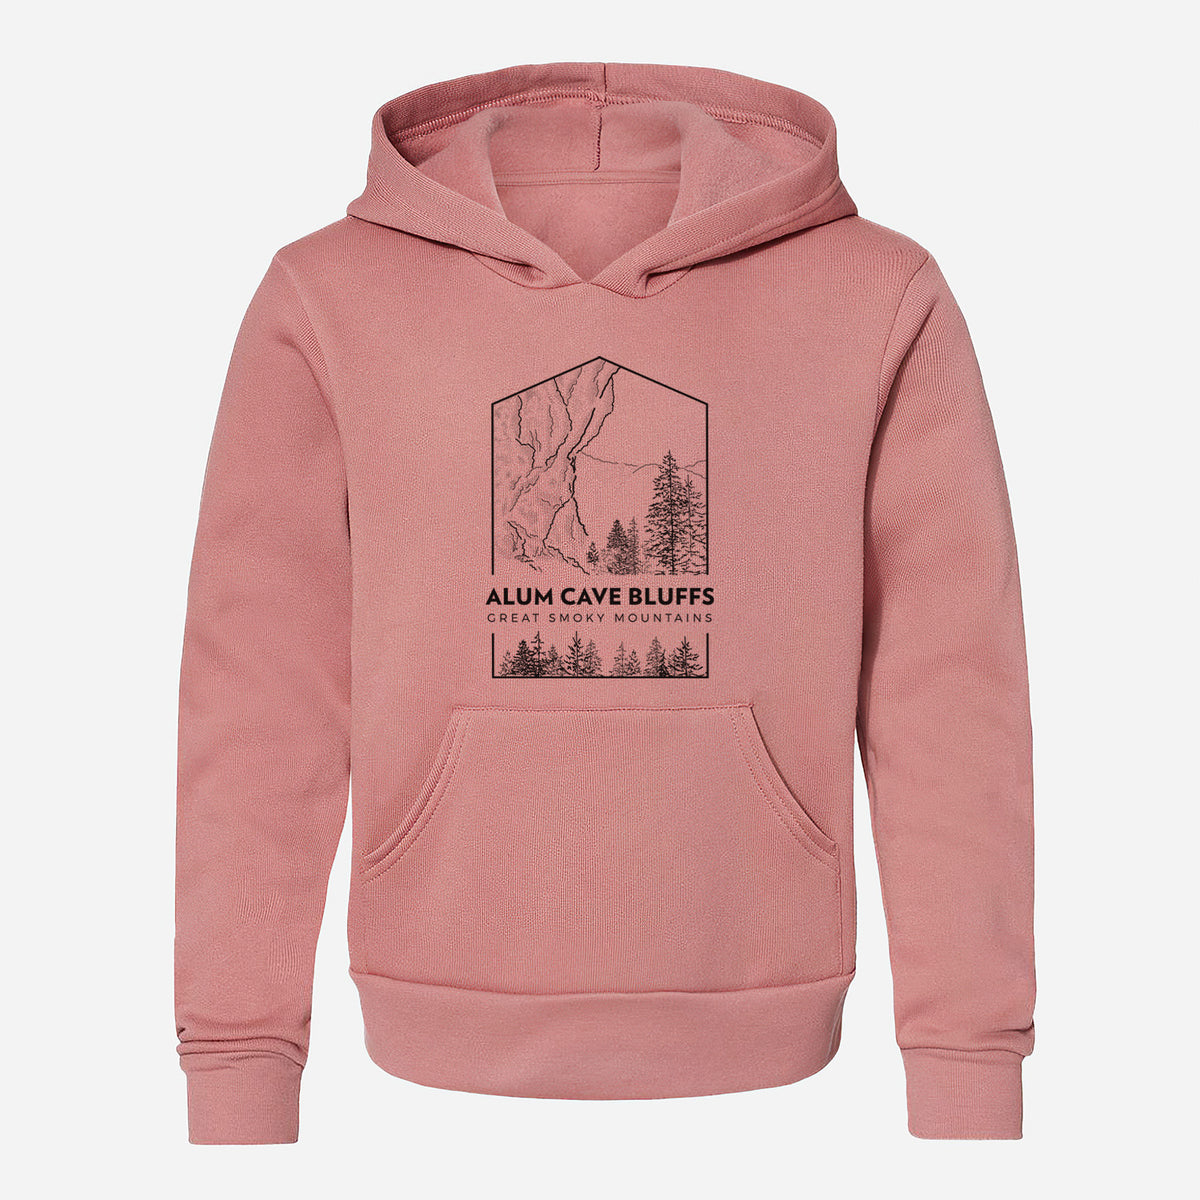 Alum Cave Bluffs - Great Smoky Mountains National Park - Youth Hoodie Sweatshirt